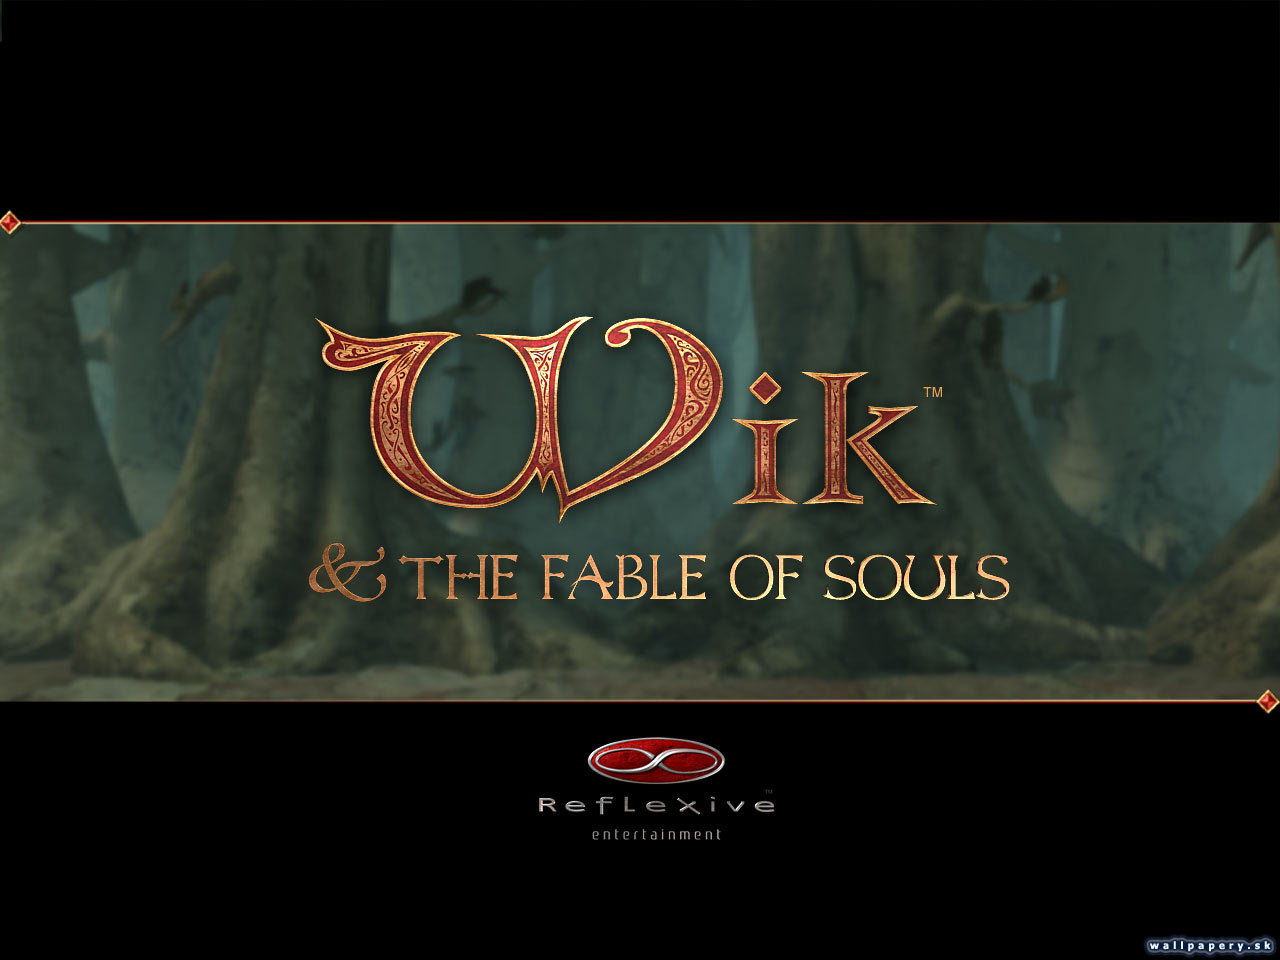 Wik and The Fable of Souls - wallpaper 2